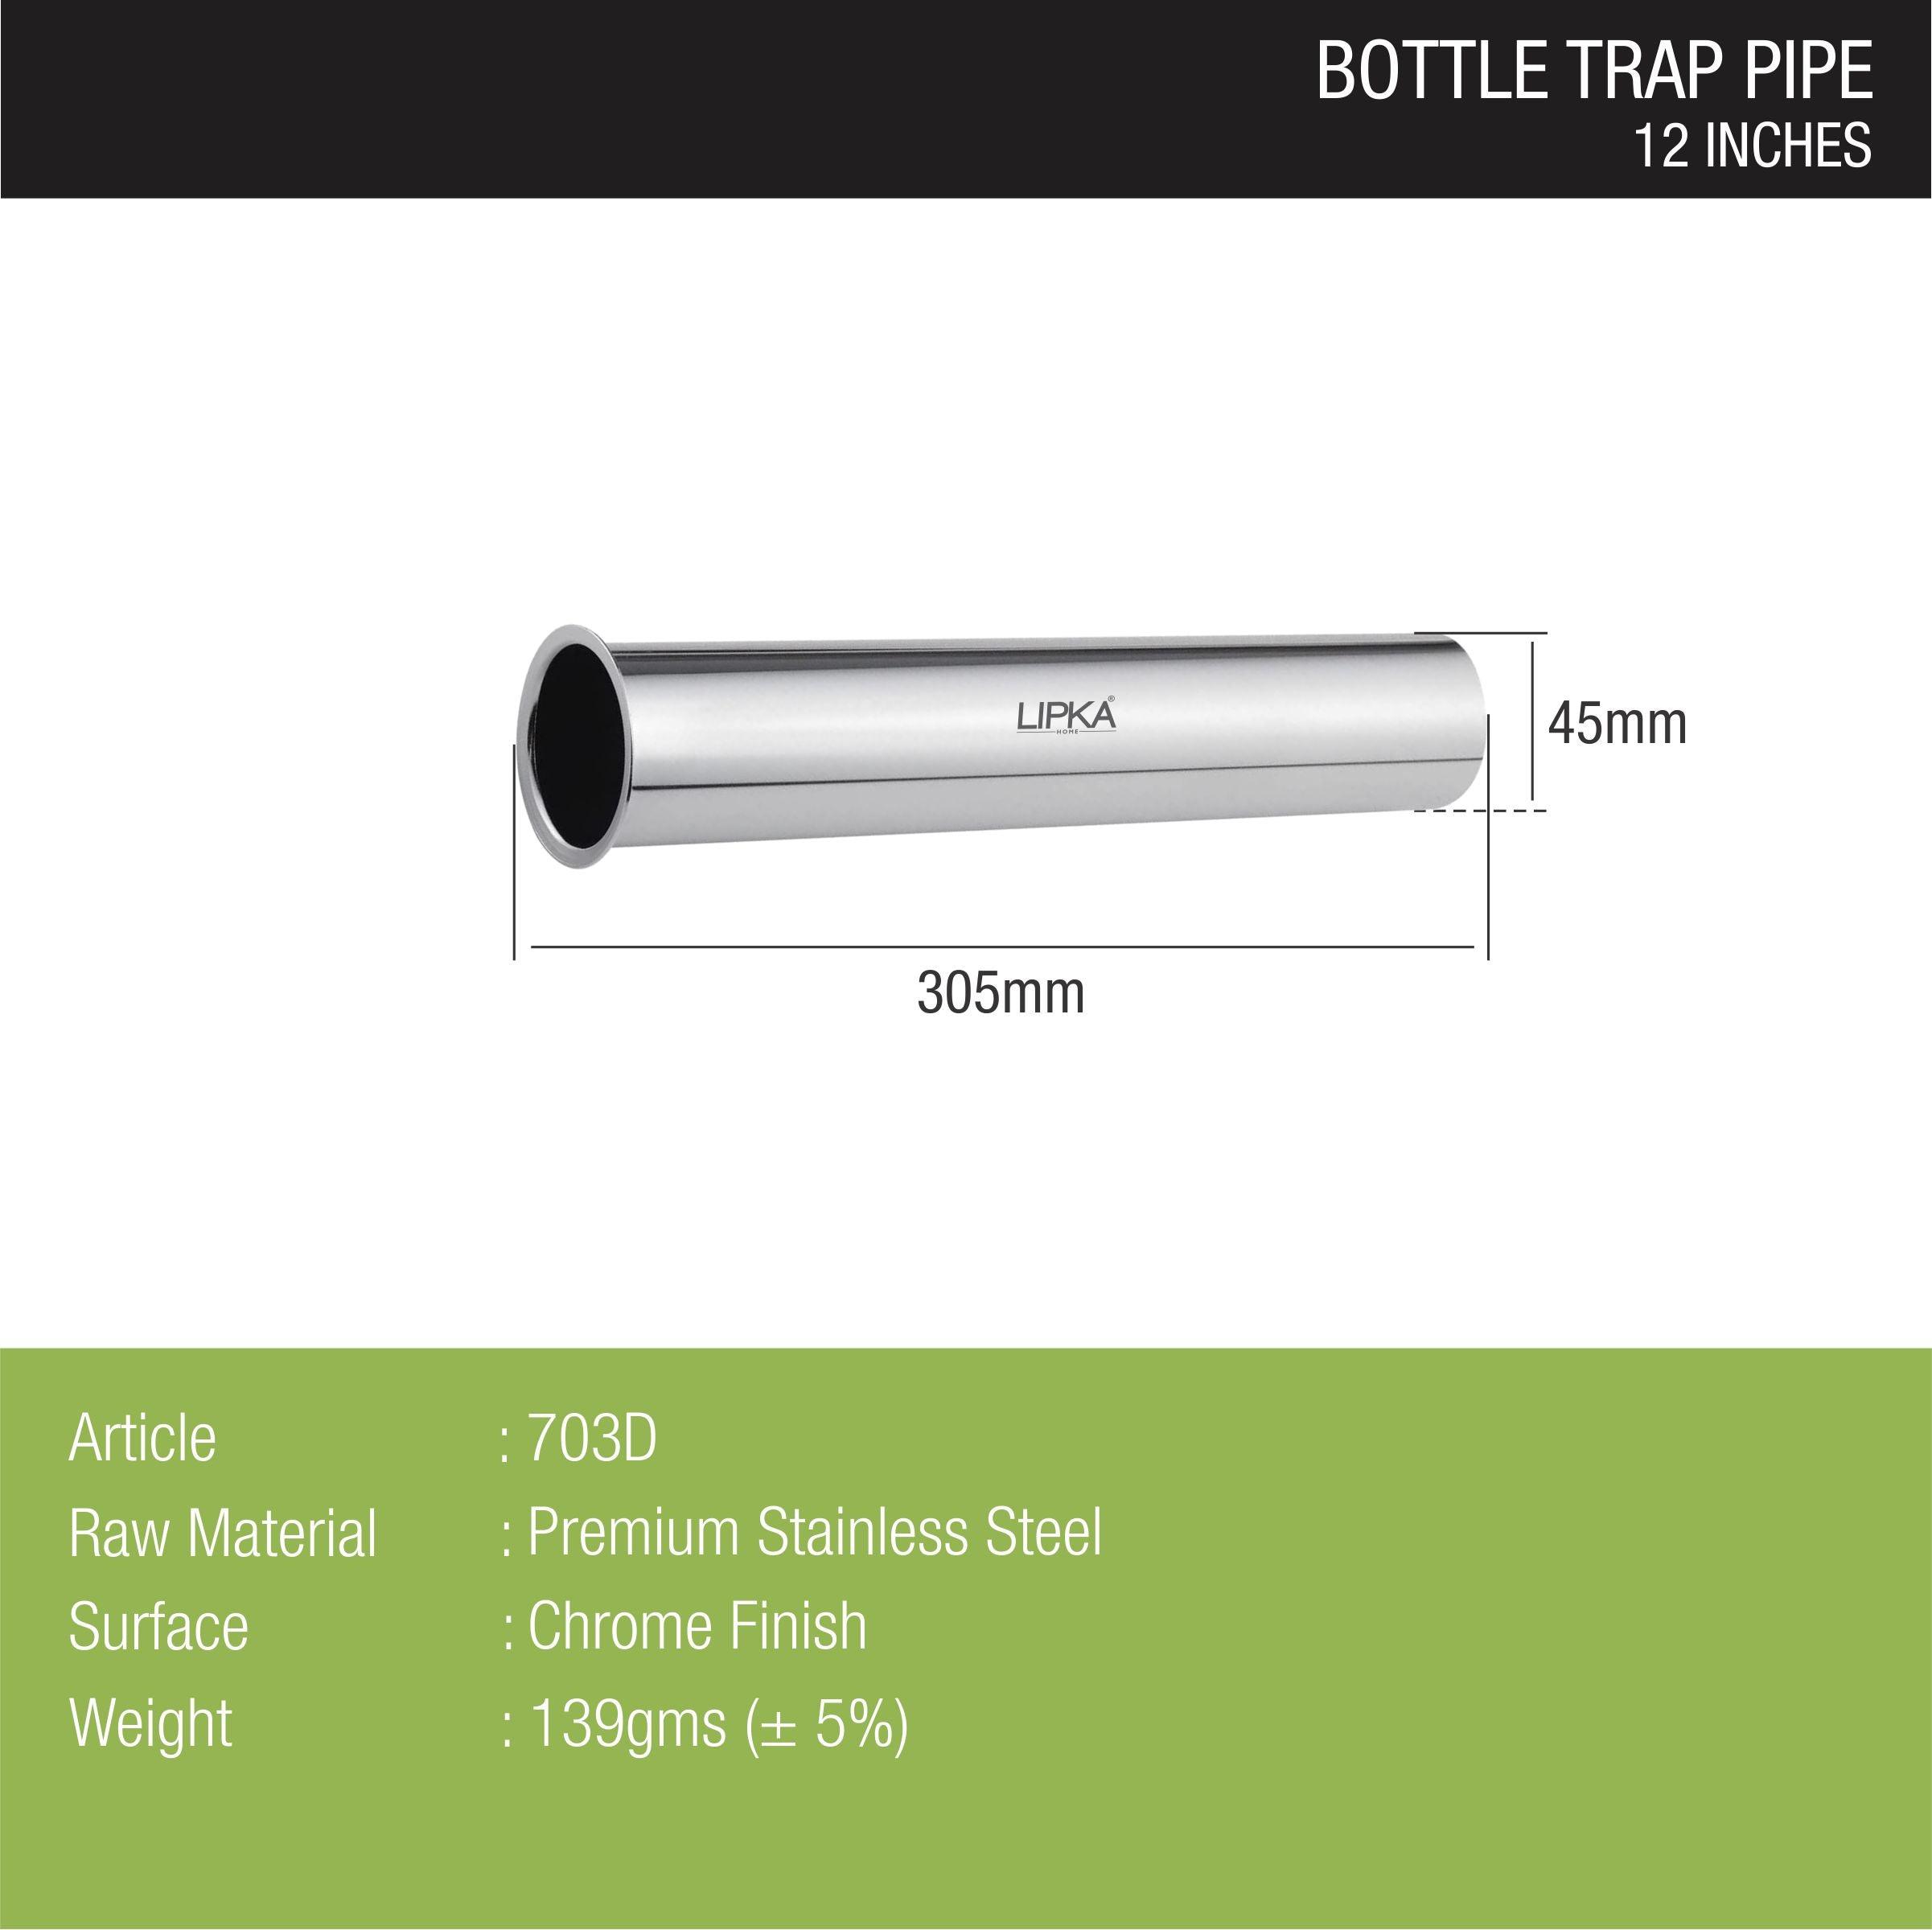 Bottle Trap Stainless Steel Pipe (12 inches) sizes and dimensions